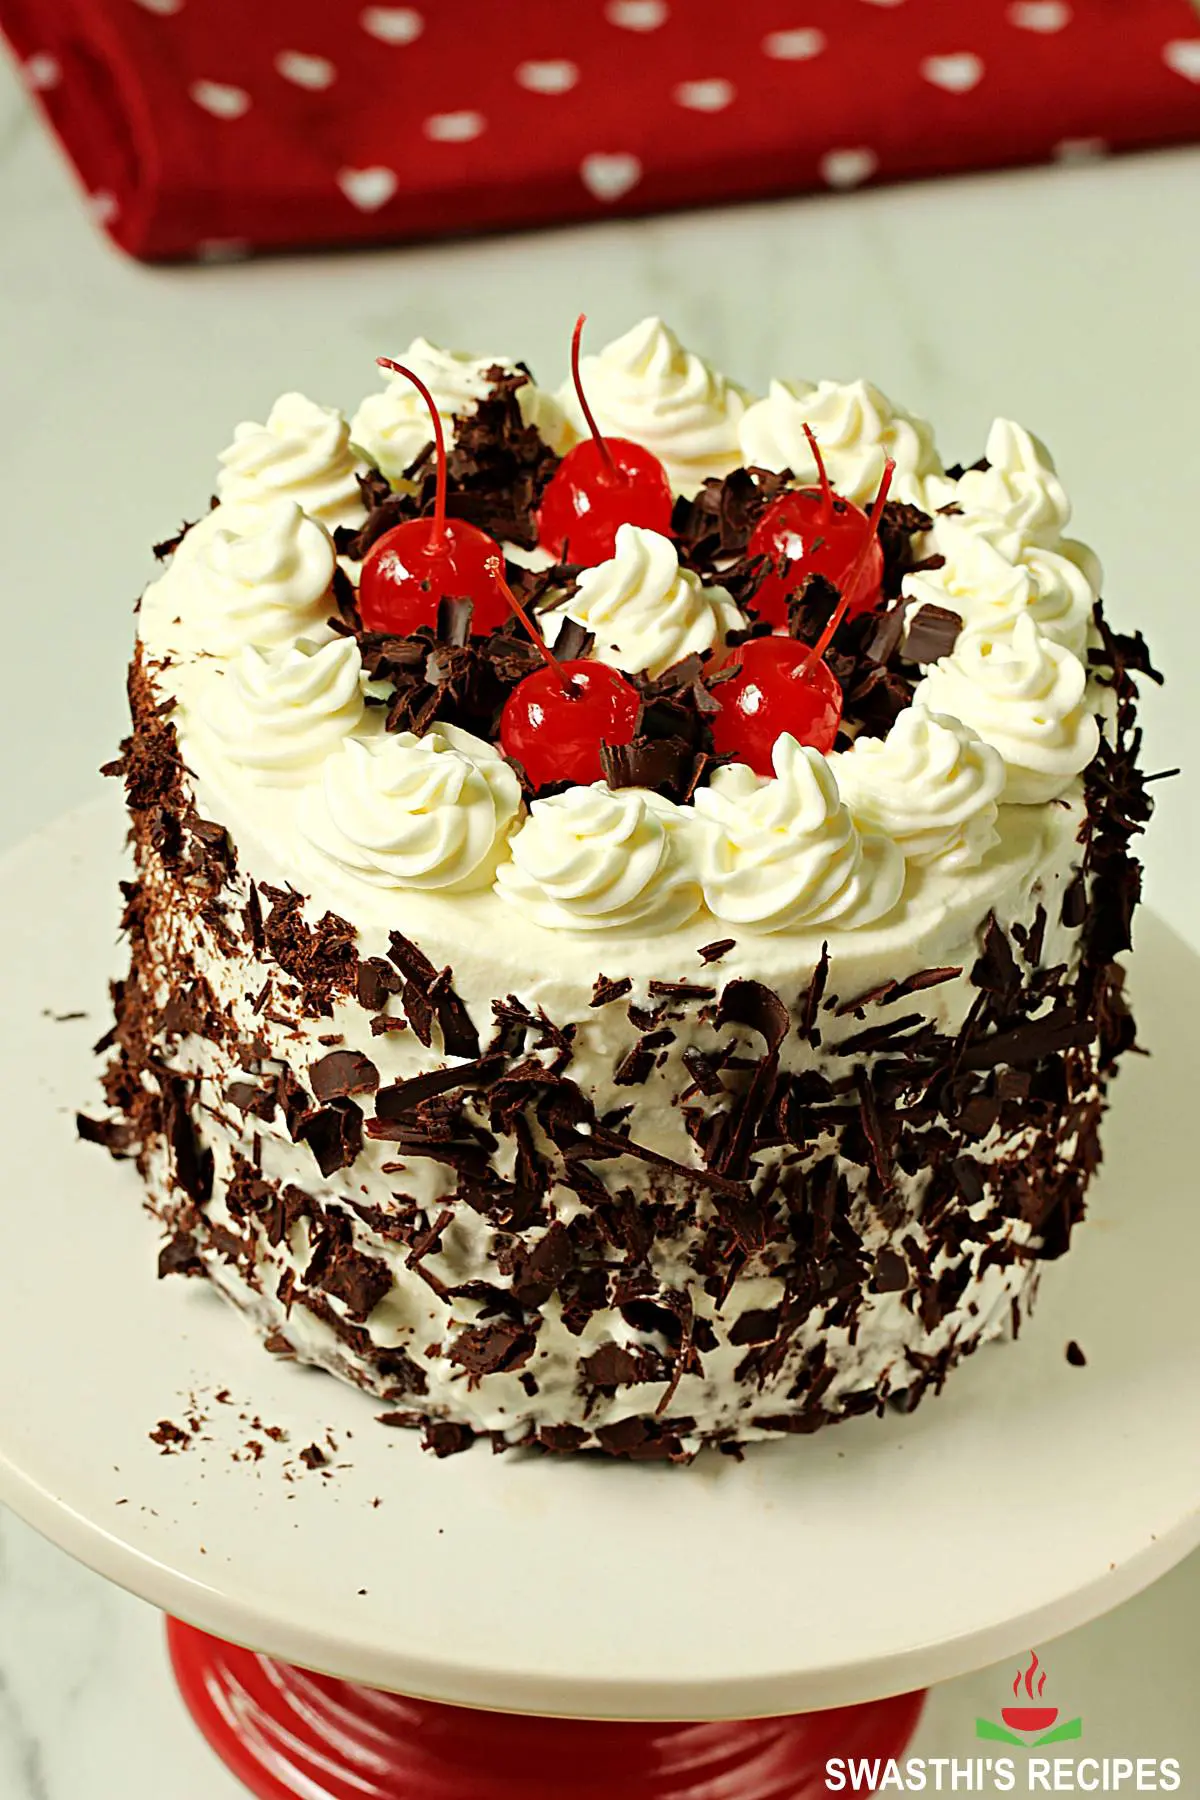 Flavore | Cake flavors, Cake flavors list, Cake servings